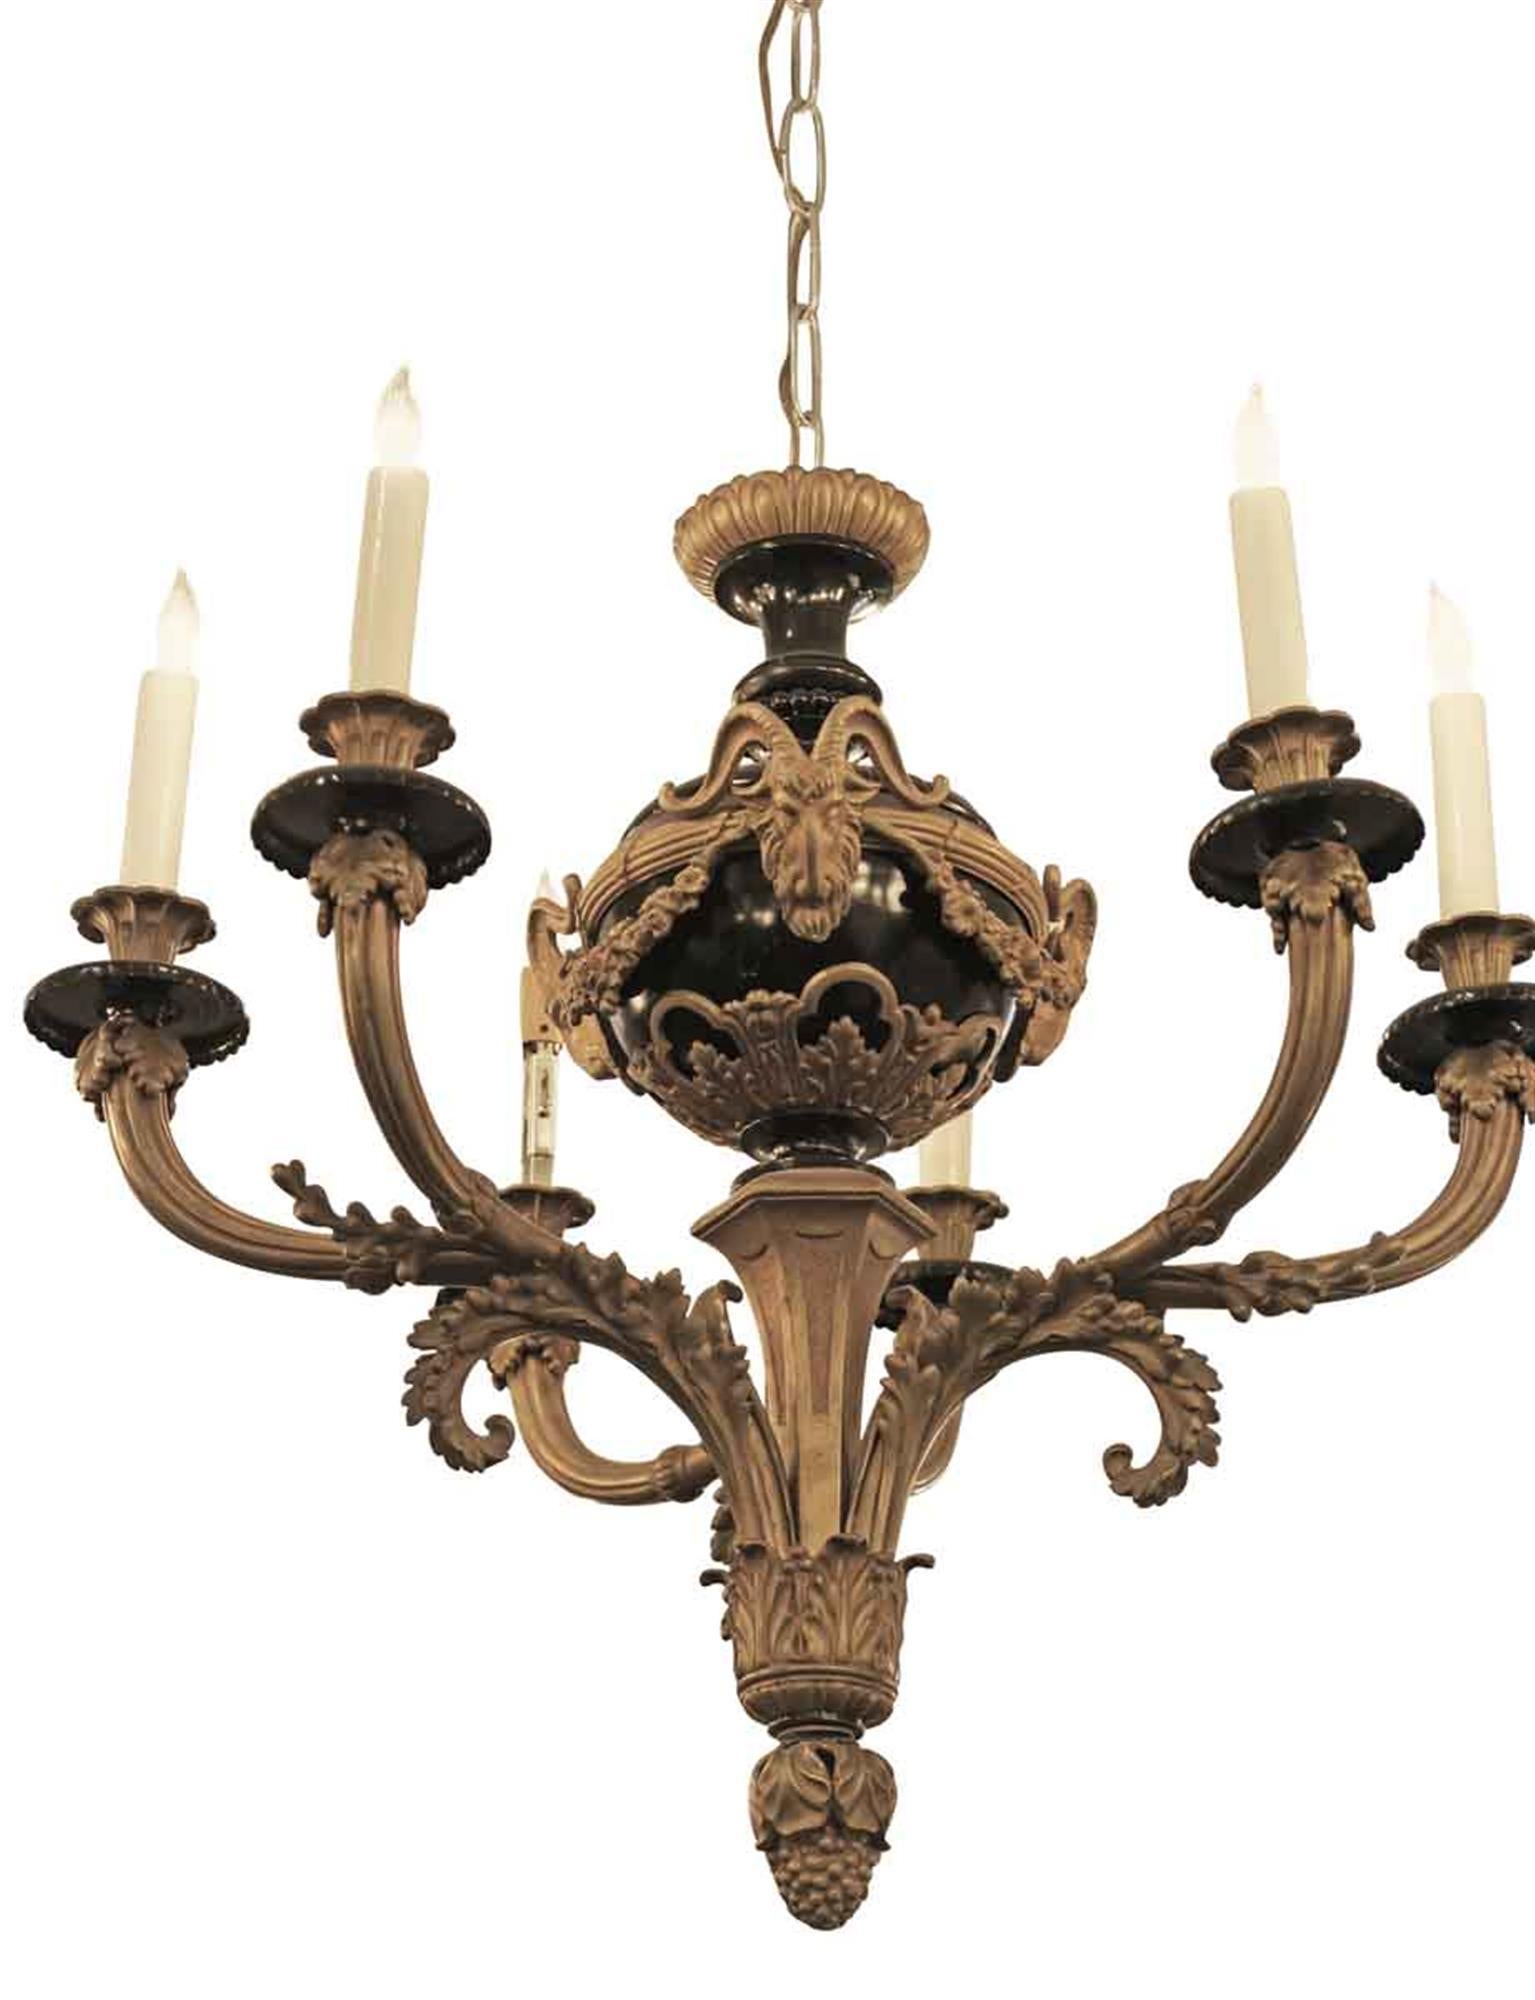 Empire style black and gold ormolu bronze six-arm chandelier with nicely articulated goat head and floral details. Made in France, circa 1900. This can be seen at our 302 Bowery location in Manhattan.